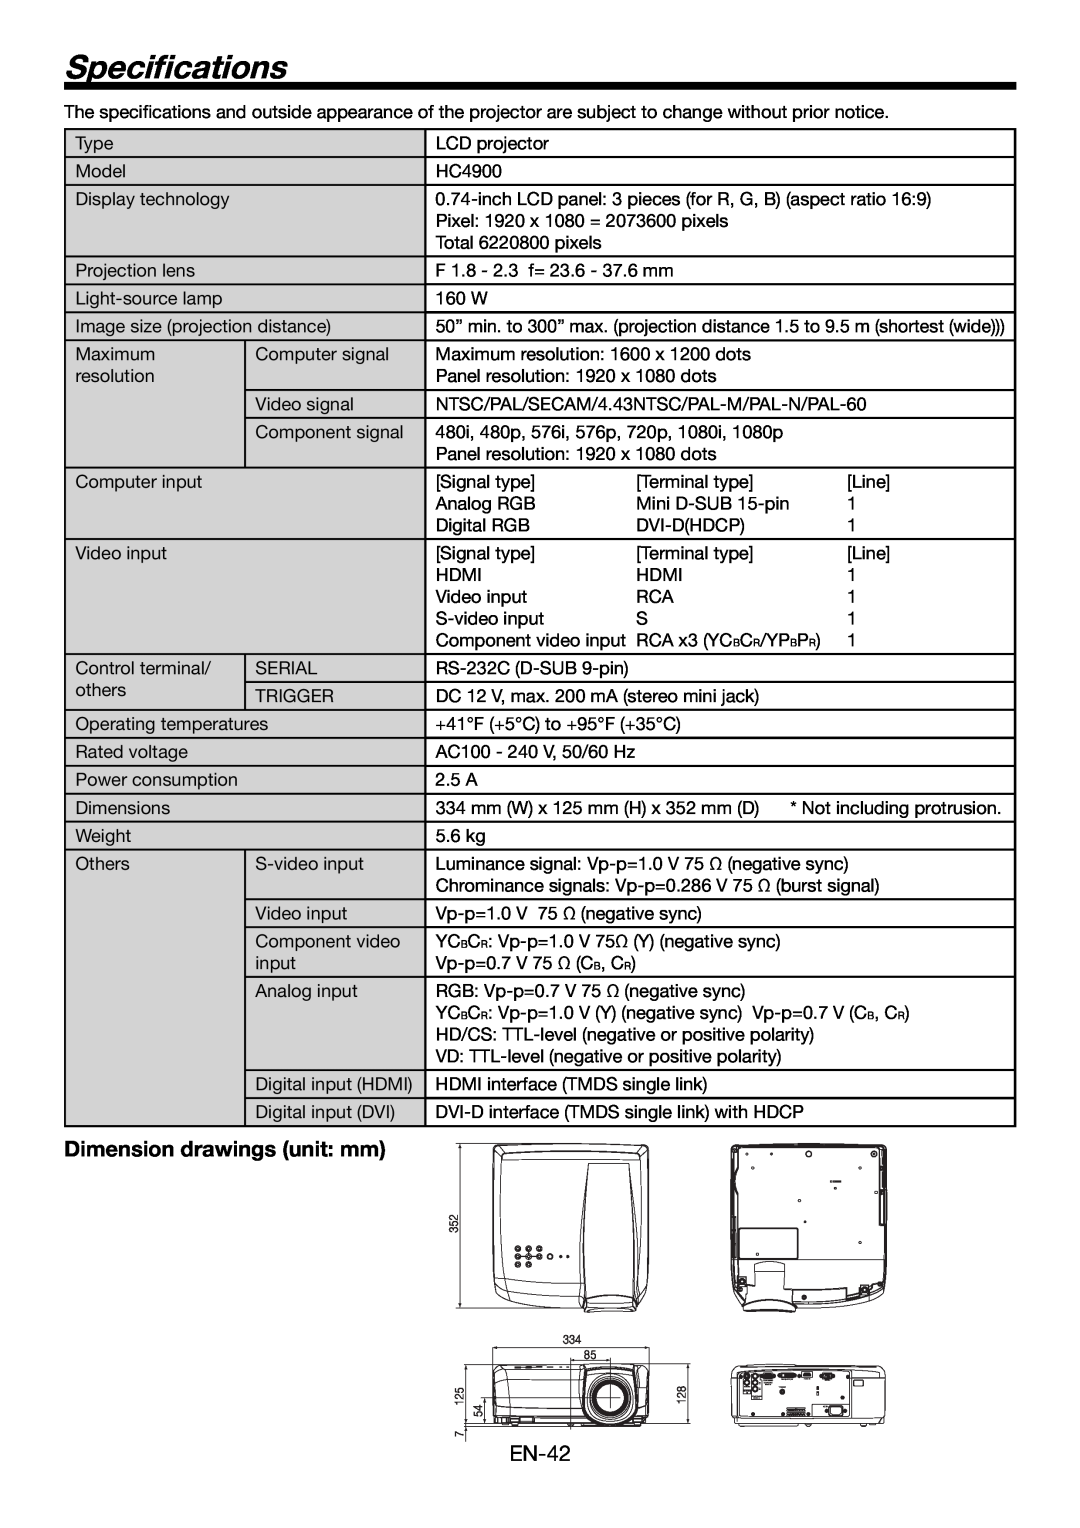 Mitsubishi Electronics HC4900 user manual Speciﬁcations, Dimension drawings unit mm 